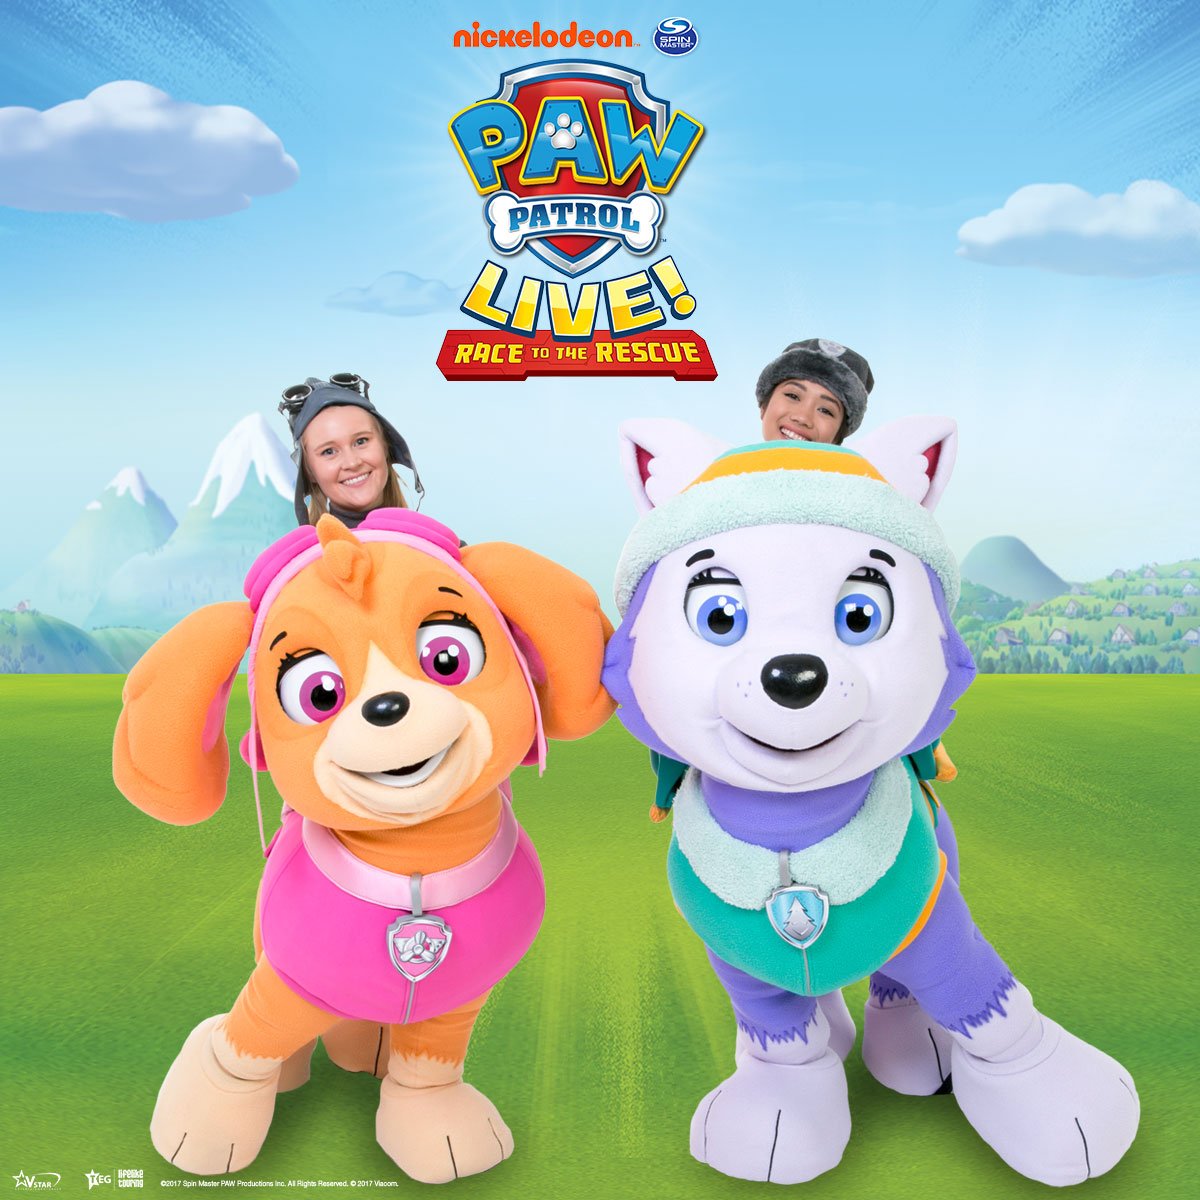 PAW Patrol Live UK on Twitter: "Cheer on the pups at @ArenaNewcastle today! Make sure share your PAW-tacular photos https://t.co/g90ab5vTBc" / Twitter